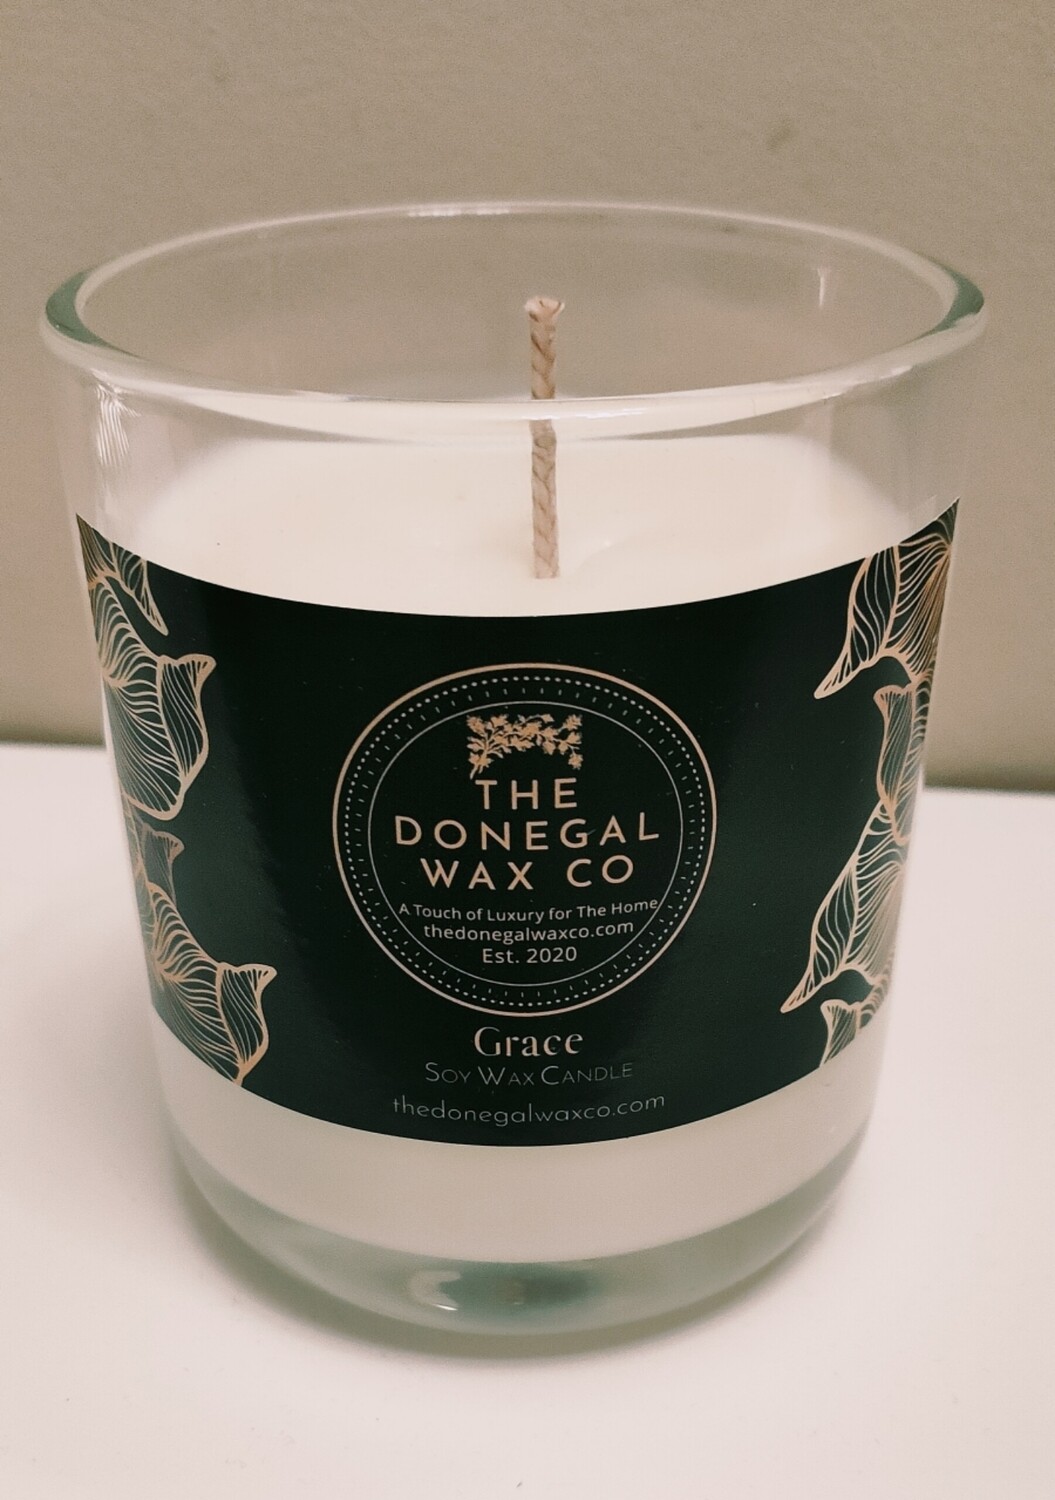 Grace Soy Wax Candle